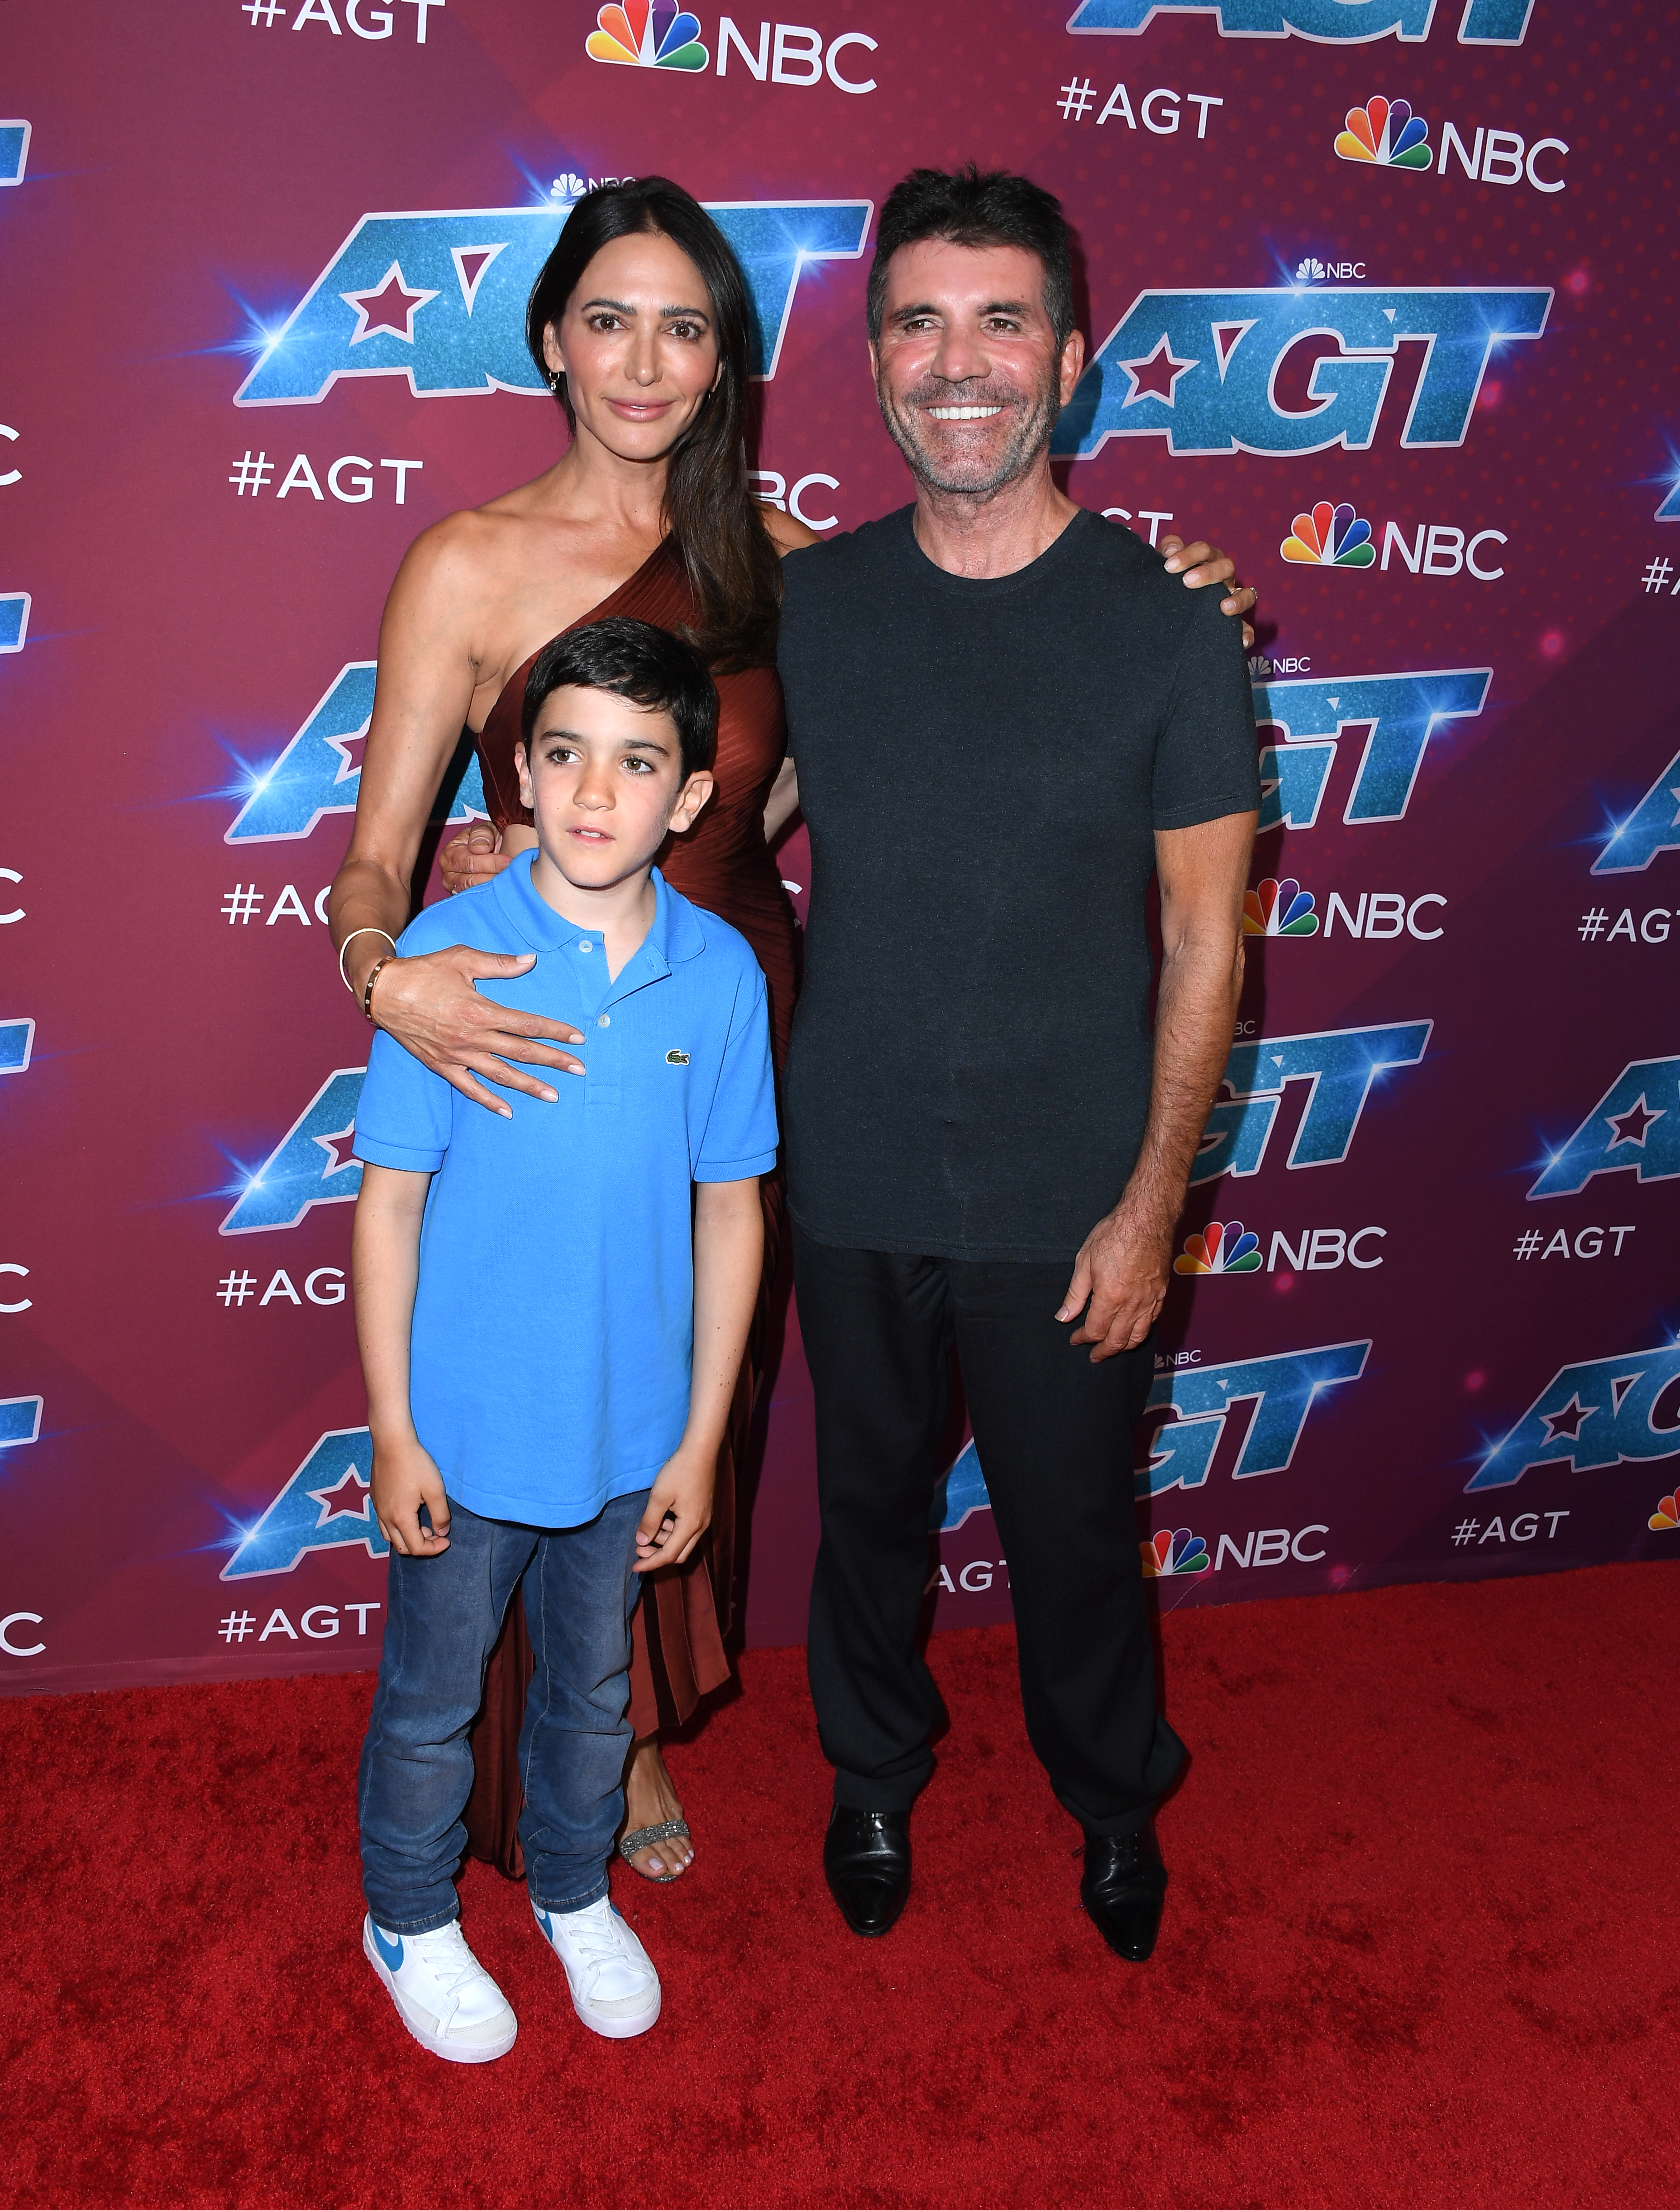 Cowell recently admitted to working a four day week to spend more time with his family